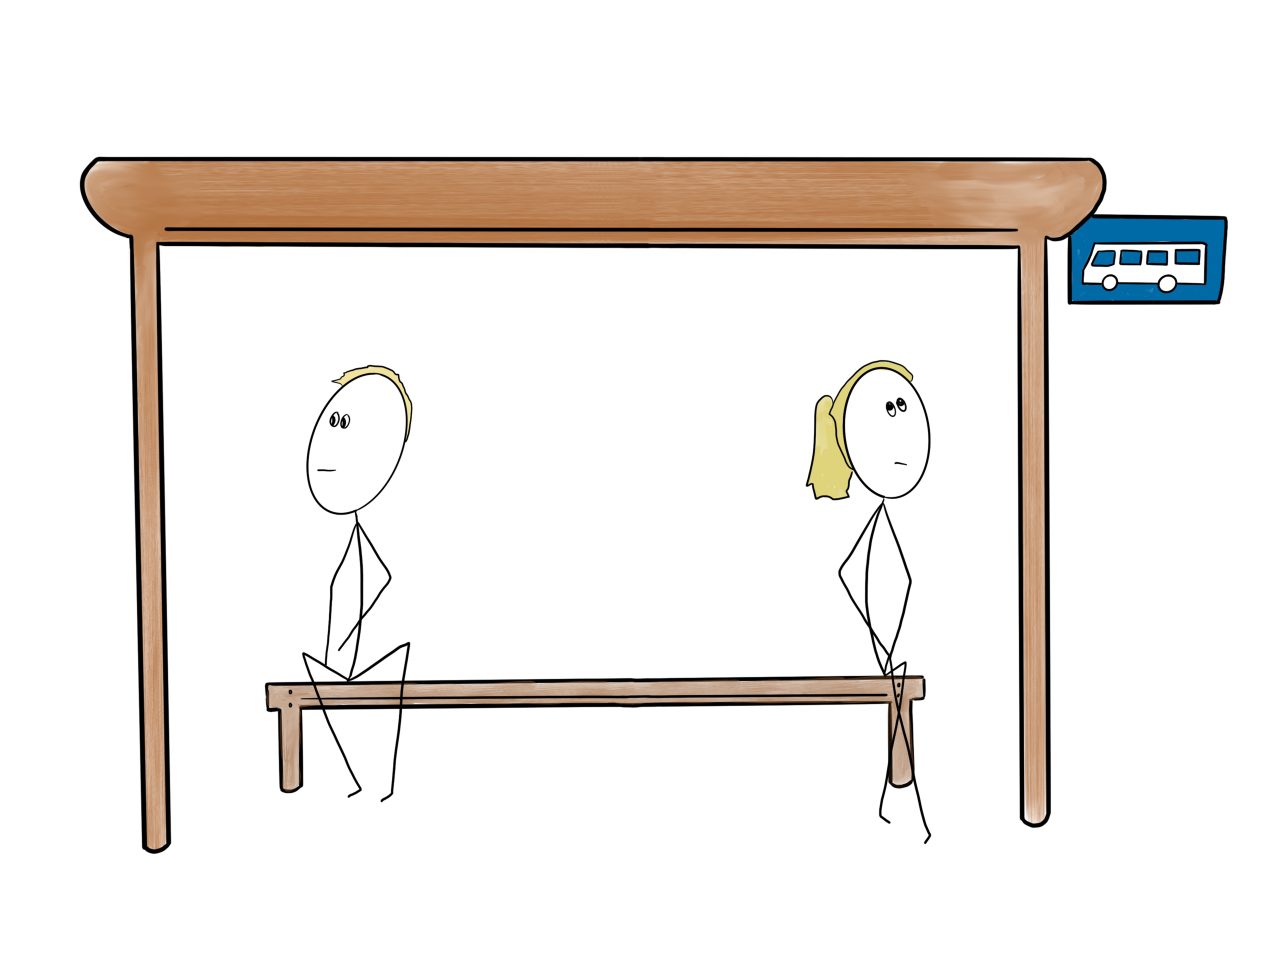 Social distancing in a bus shed. Two people sitting on either side of a bench facing away from each other.